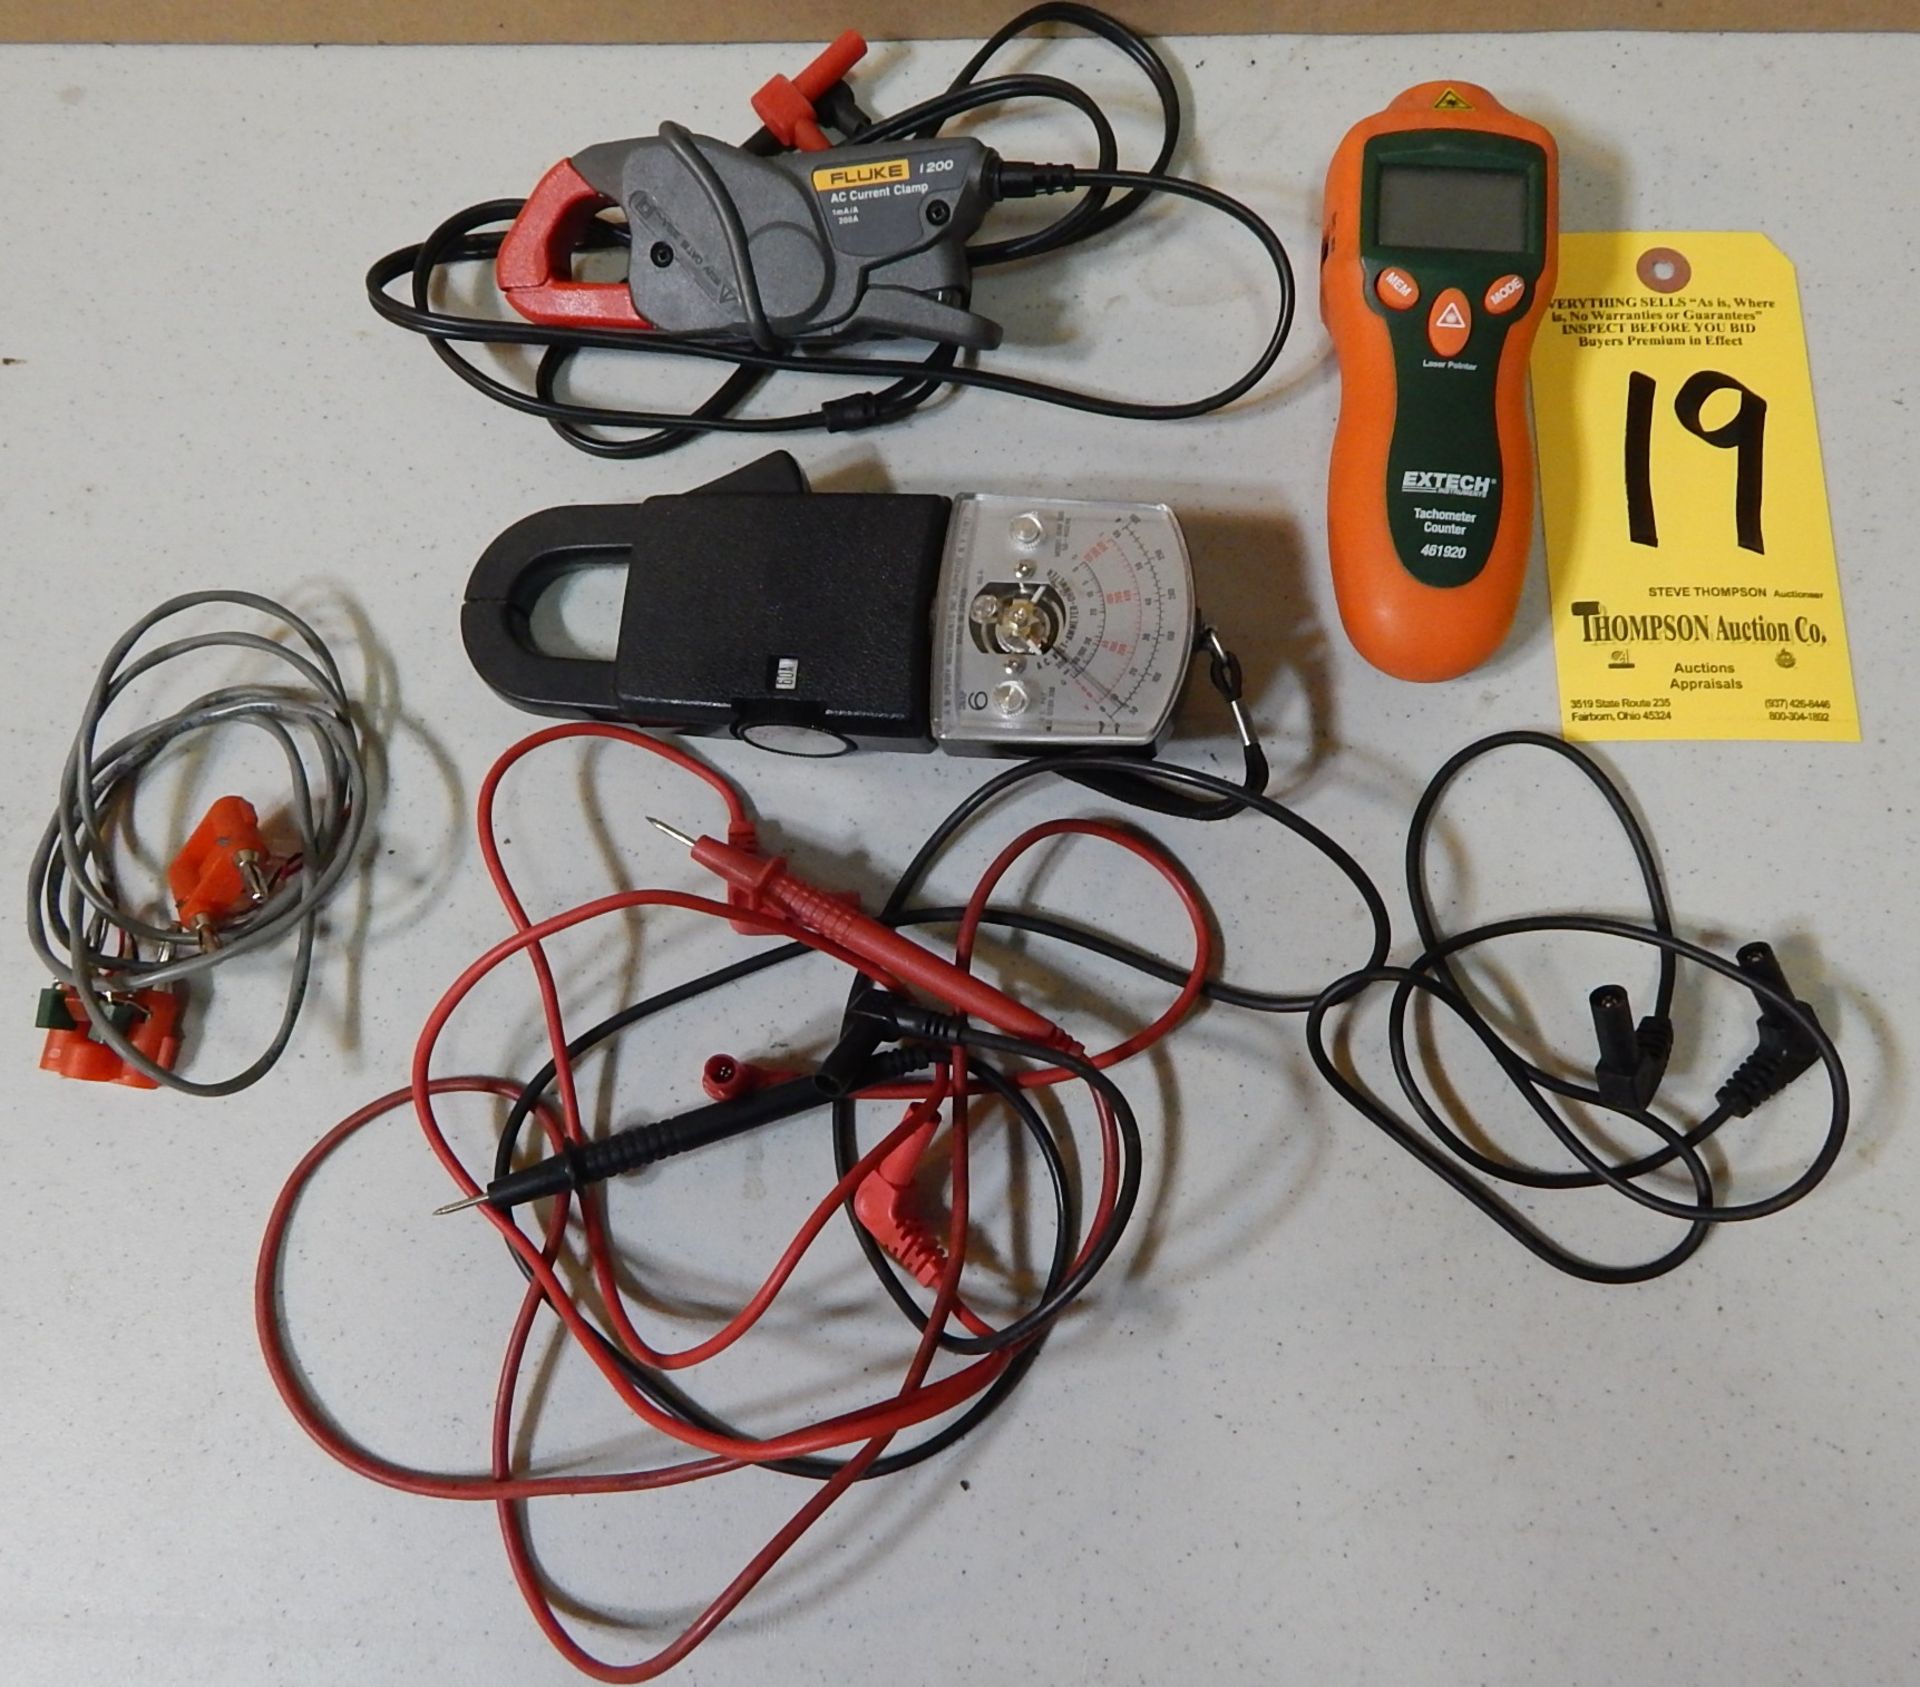 Extech Digital Tachometer, Fluke AC Current Clamp, and Sperry Multimeter